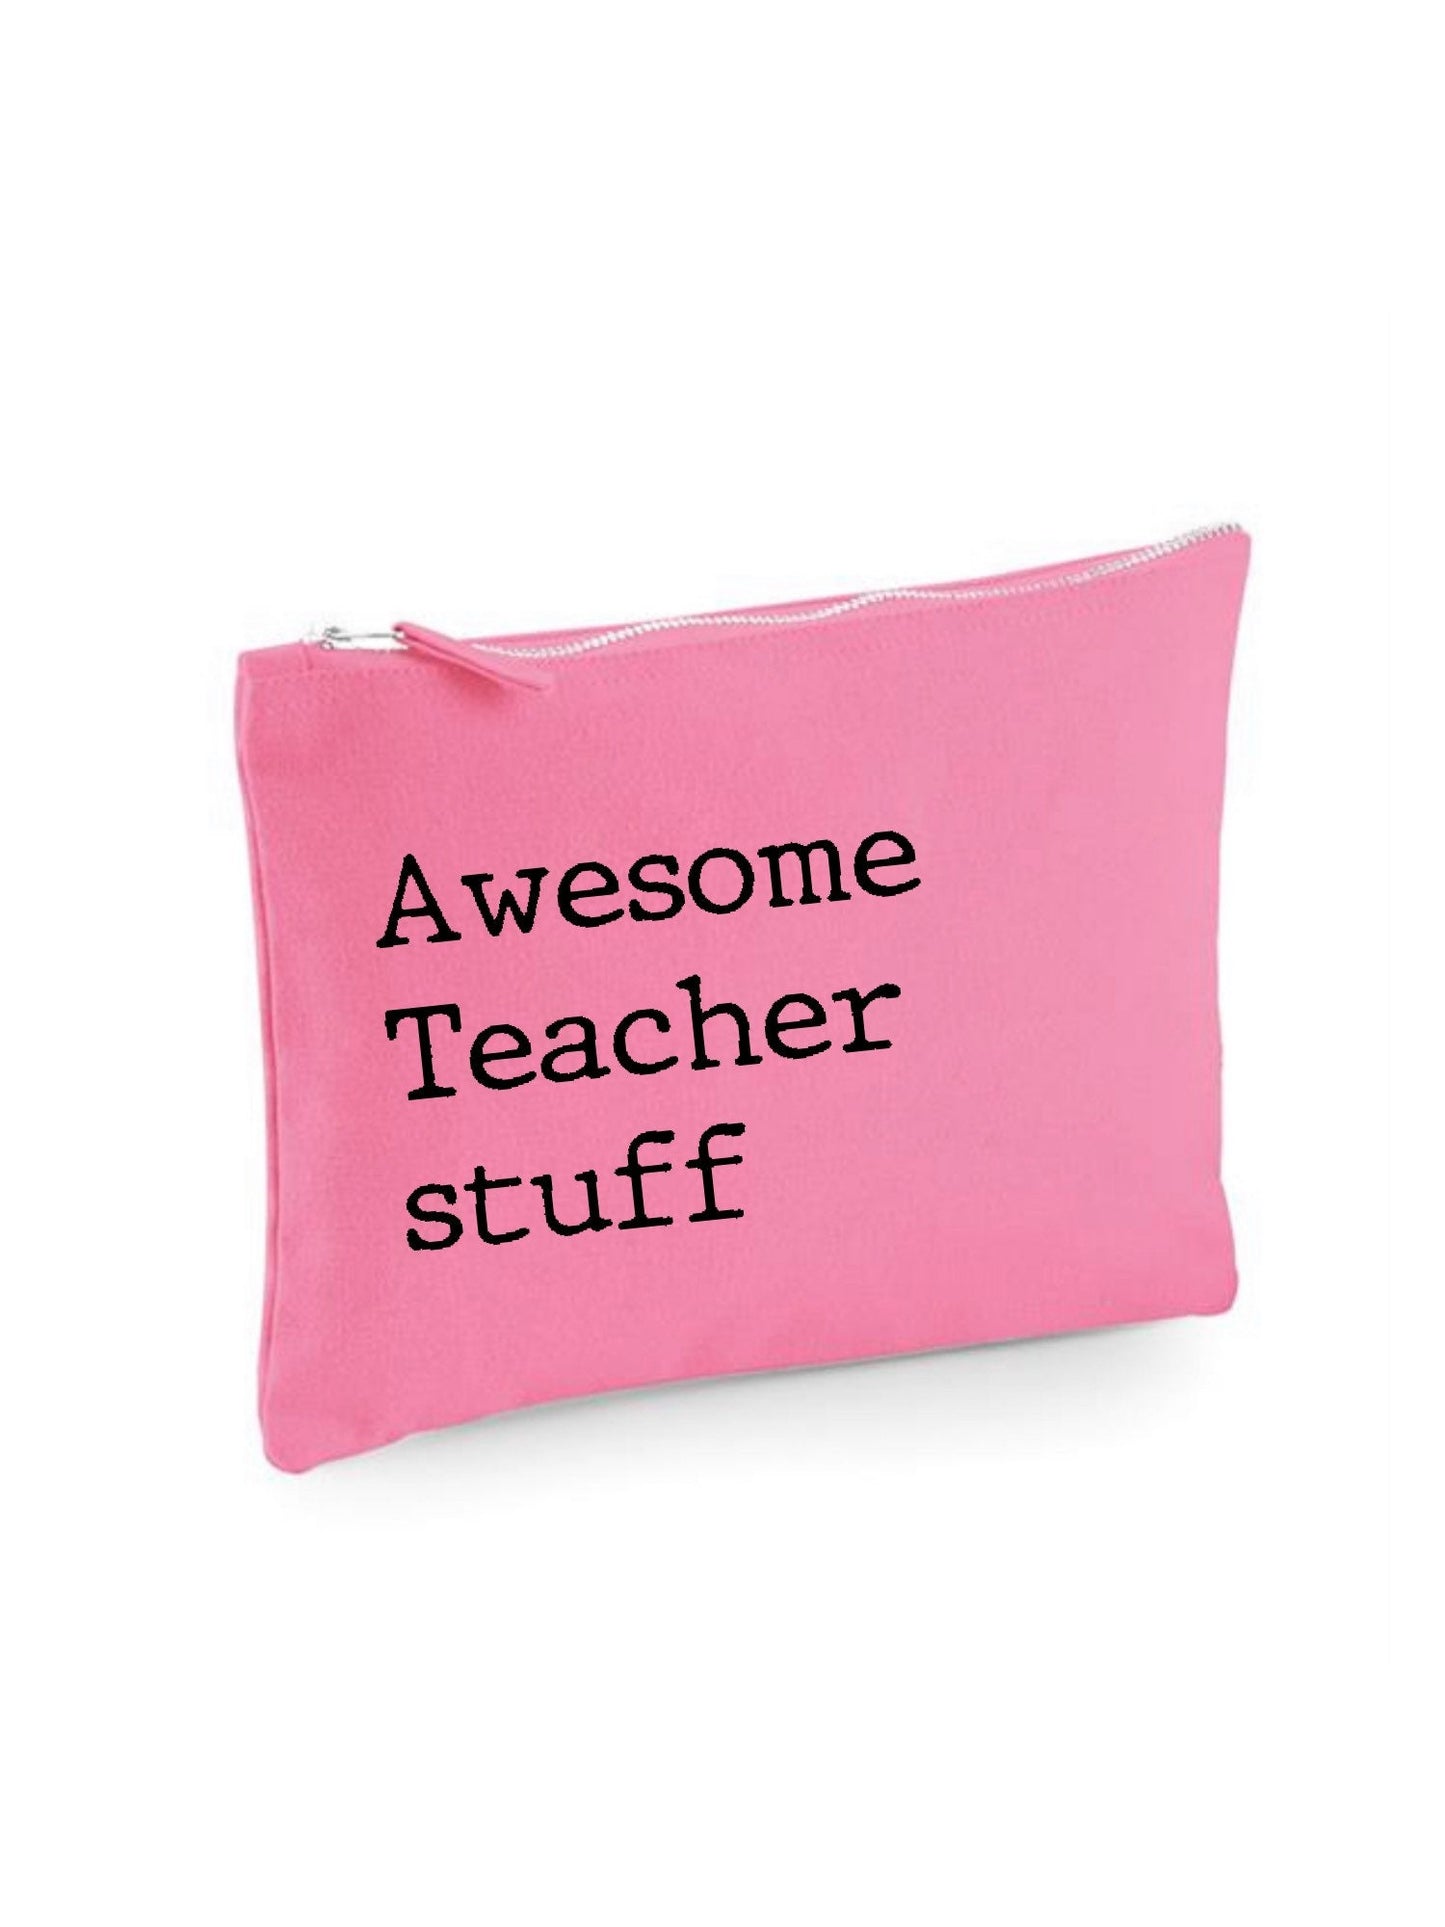 Teacher gift, awesome teacher stuff pouch, pencil and stationery case for end of school teacher presents